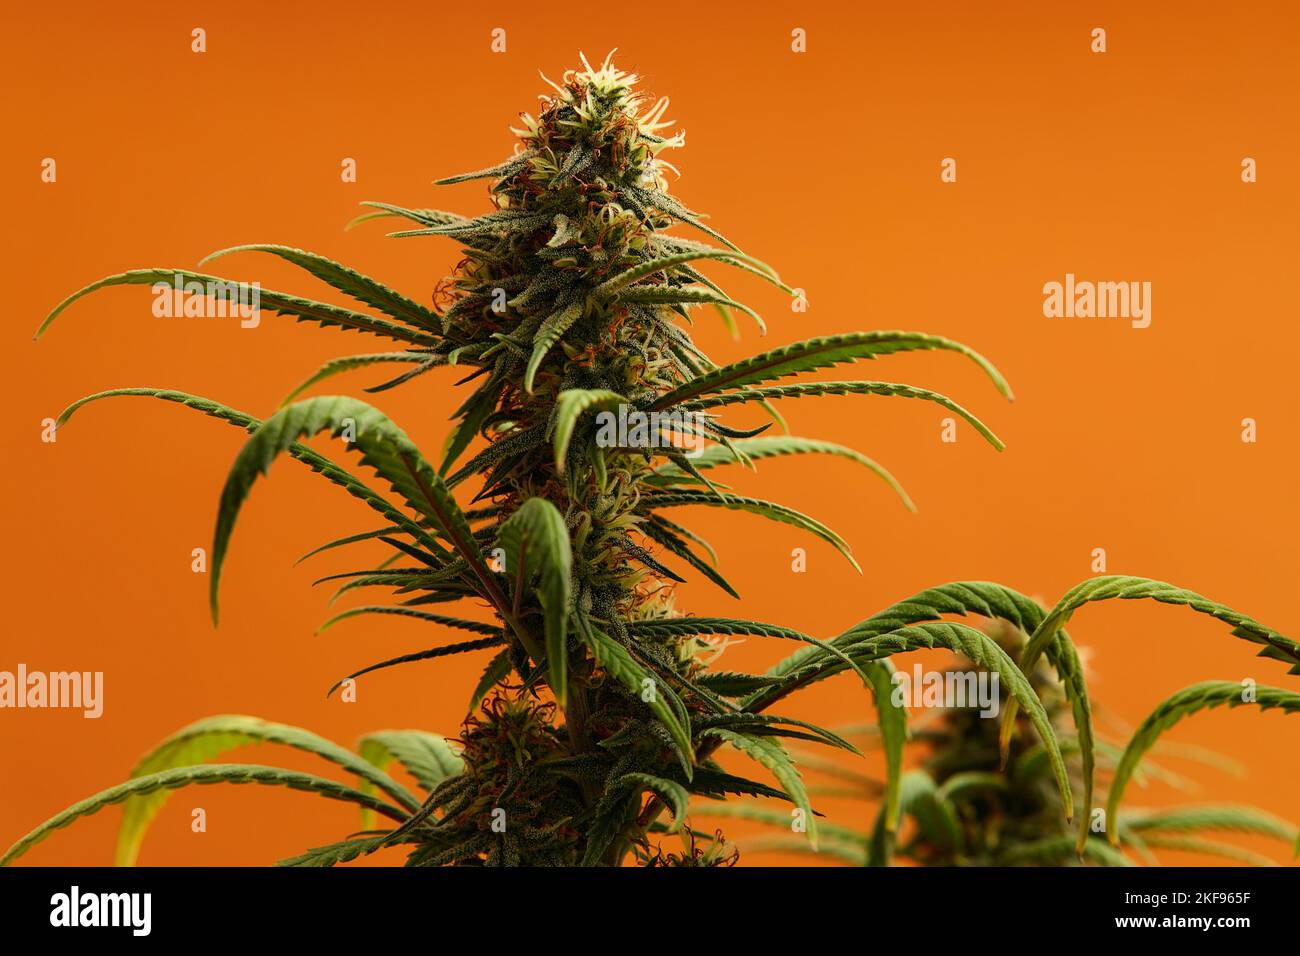 https://c8.alamy.com/comp/2KF965F/marijuana-plants-long-banner-beautiful-tropical-cannabis-background-new-look-on-agricultural-strain-of-hemp-vibrant-exotic-cannabis-with-leaves-and-2KF965F.jpg